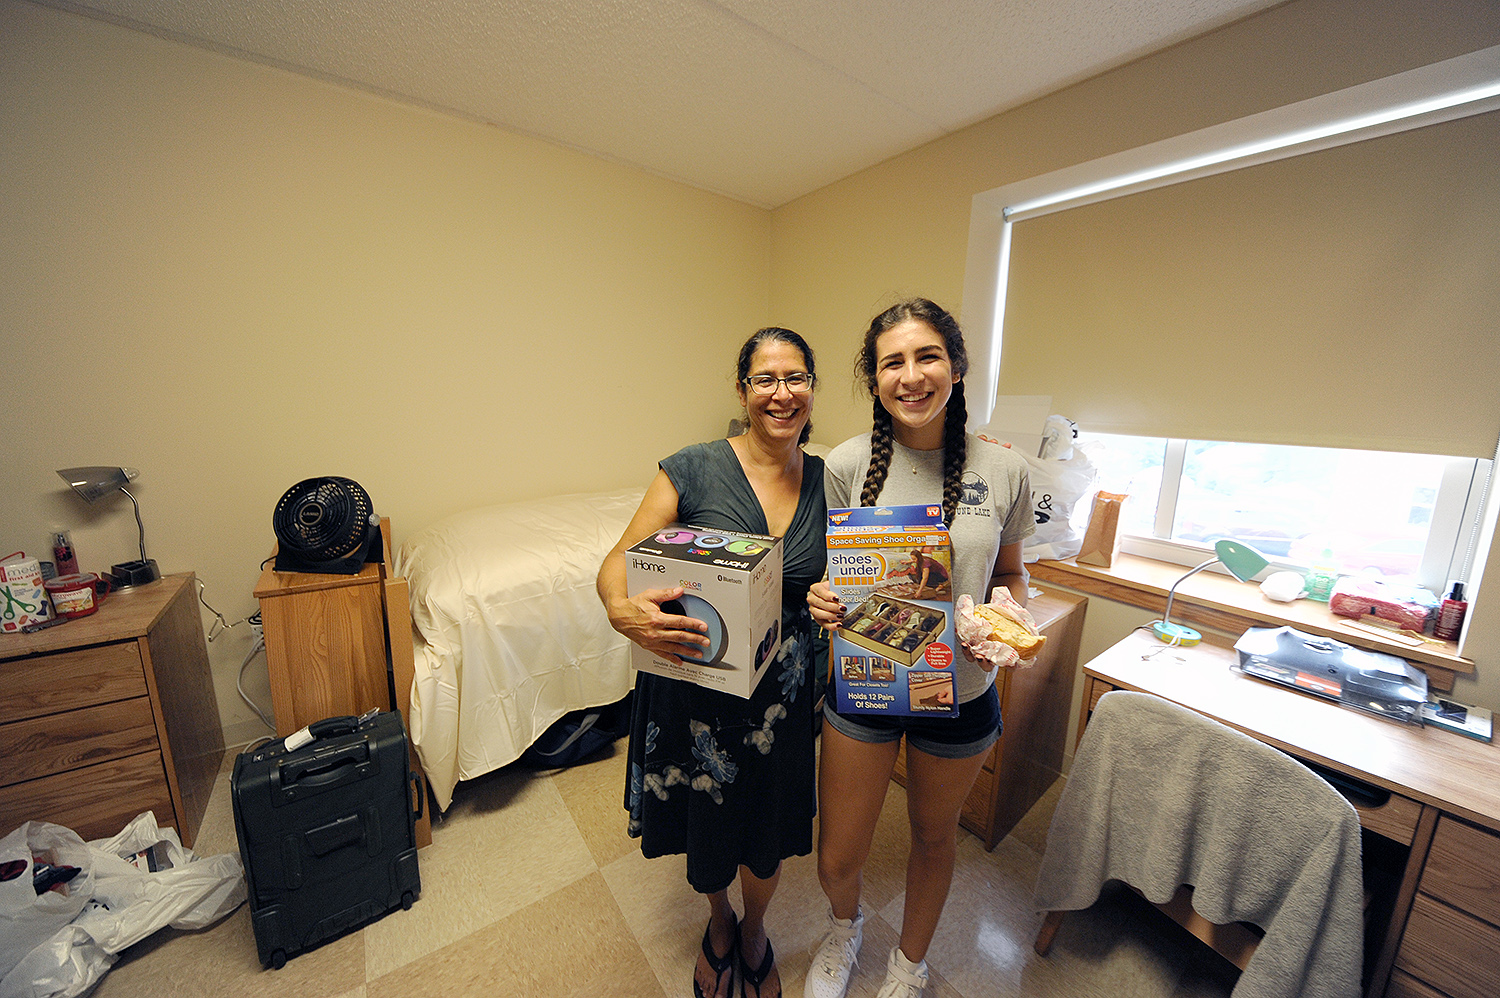 Nancy Auerbach helped her daughter Dalia ’20 move to campus on Arrival Day. The Auerbach family is from Claremont, Calif. Dalia always knew she would end up on the East Coast for college and is excited for all the activities Wesleyan has to offer. 